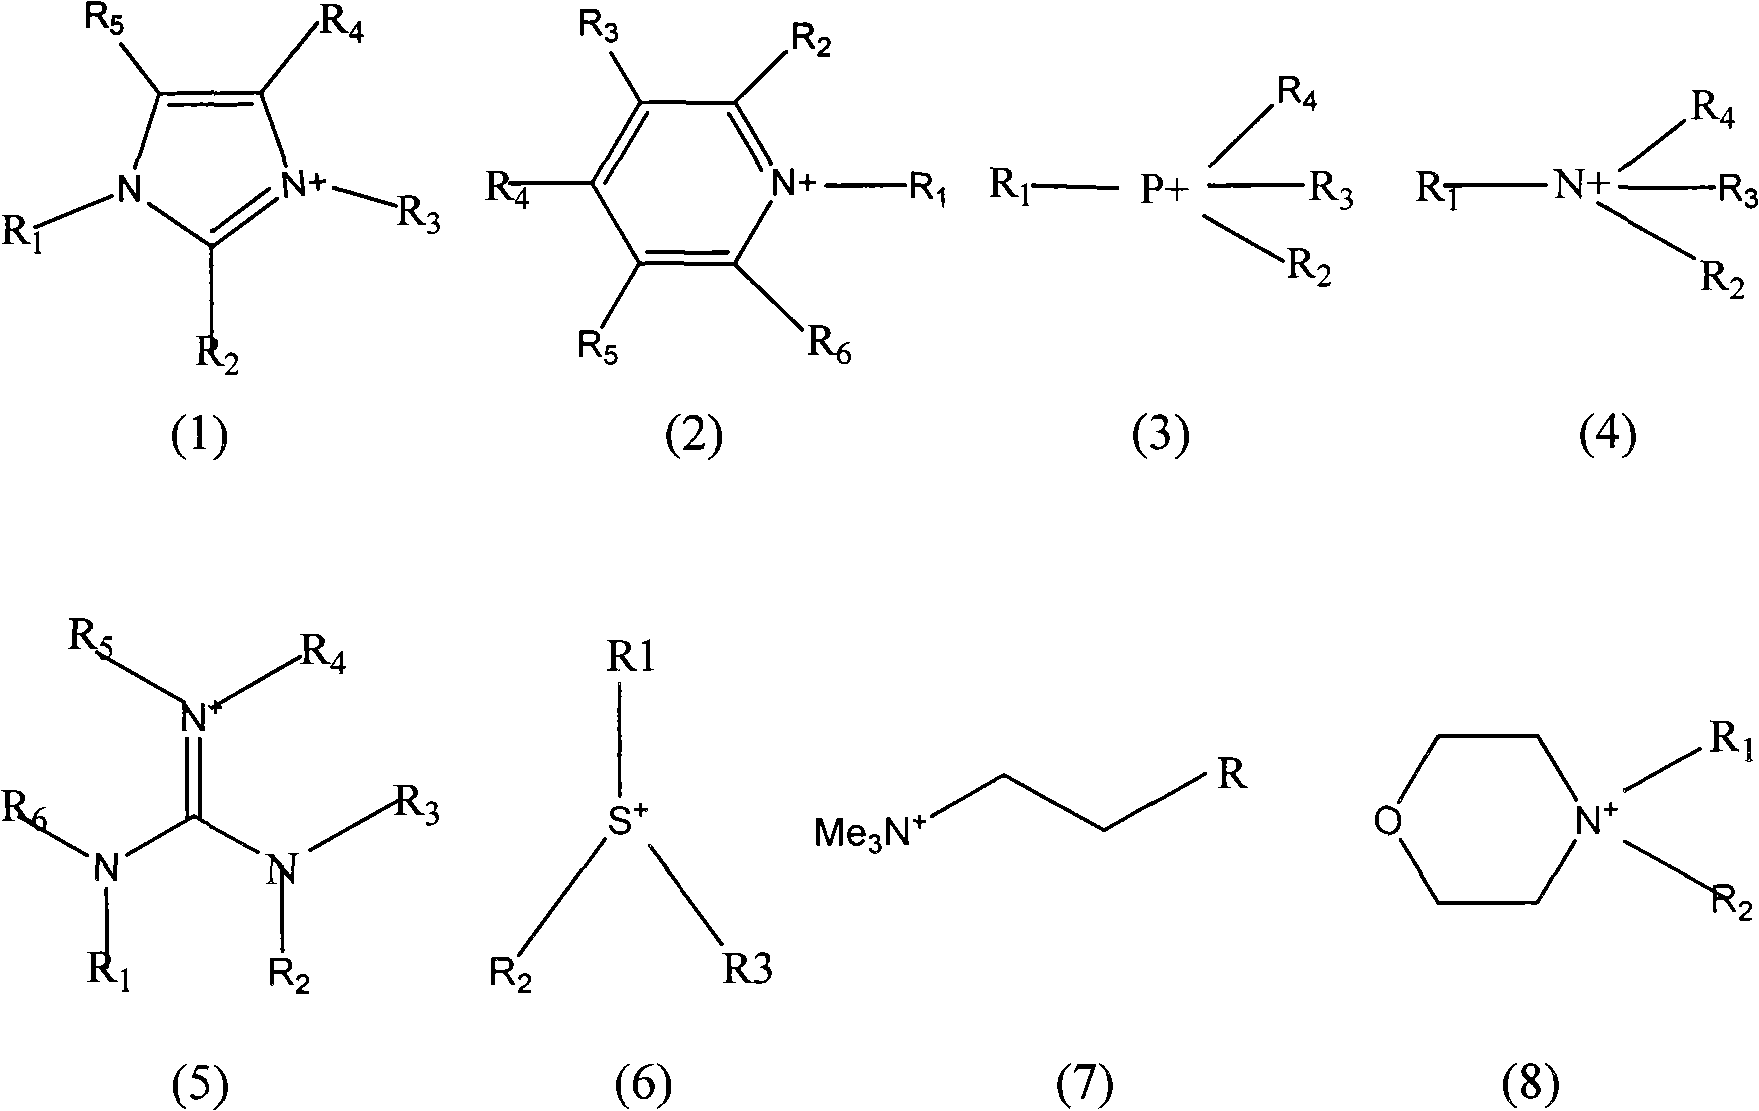 Method for catalyzing alcoholysis performed on polyethylene glycol terephthalate (PET) by using CoCl42-/NiCl42-type ionic liquid